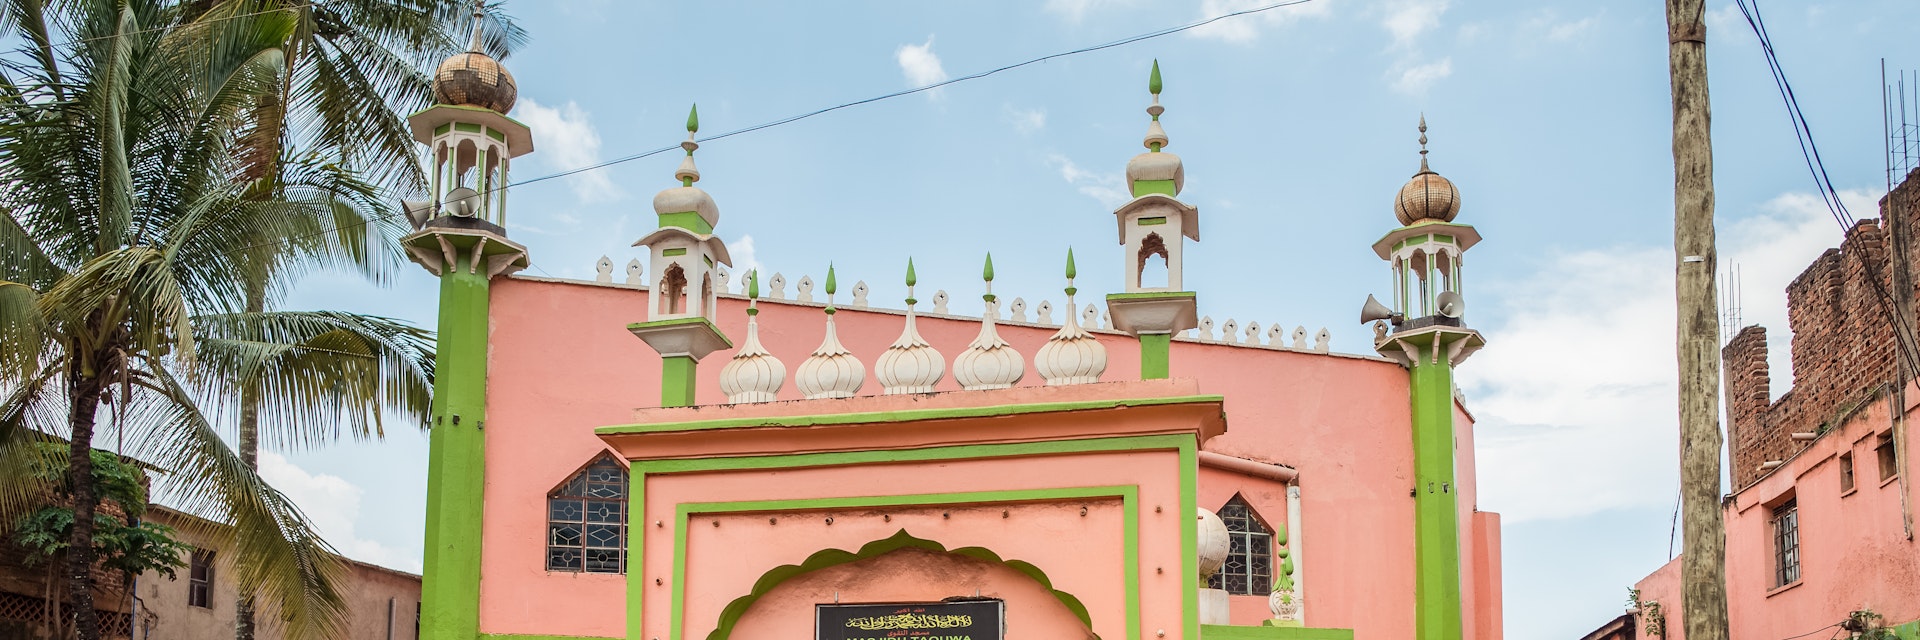 Jinja / Uganda - September 15, 2016: entrance arch to colorful pastel colored mosque